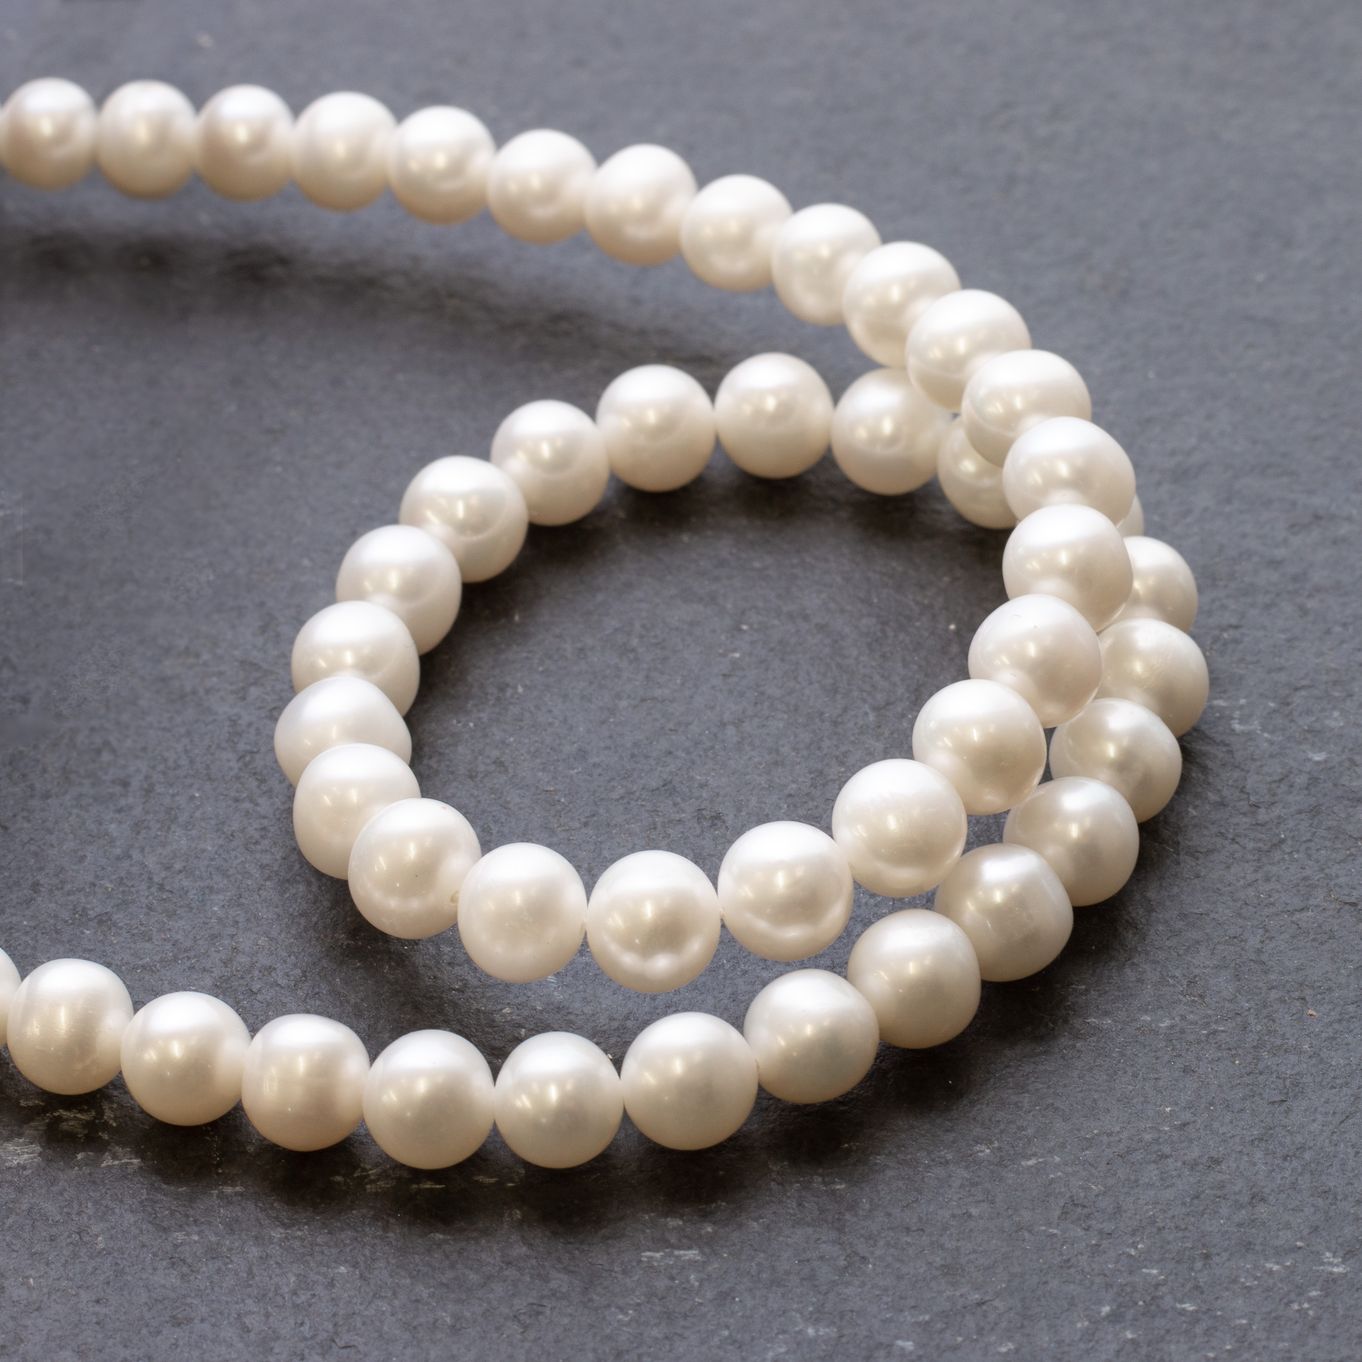 Cultured Freshwater White Pearls, 9mm Roundish